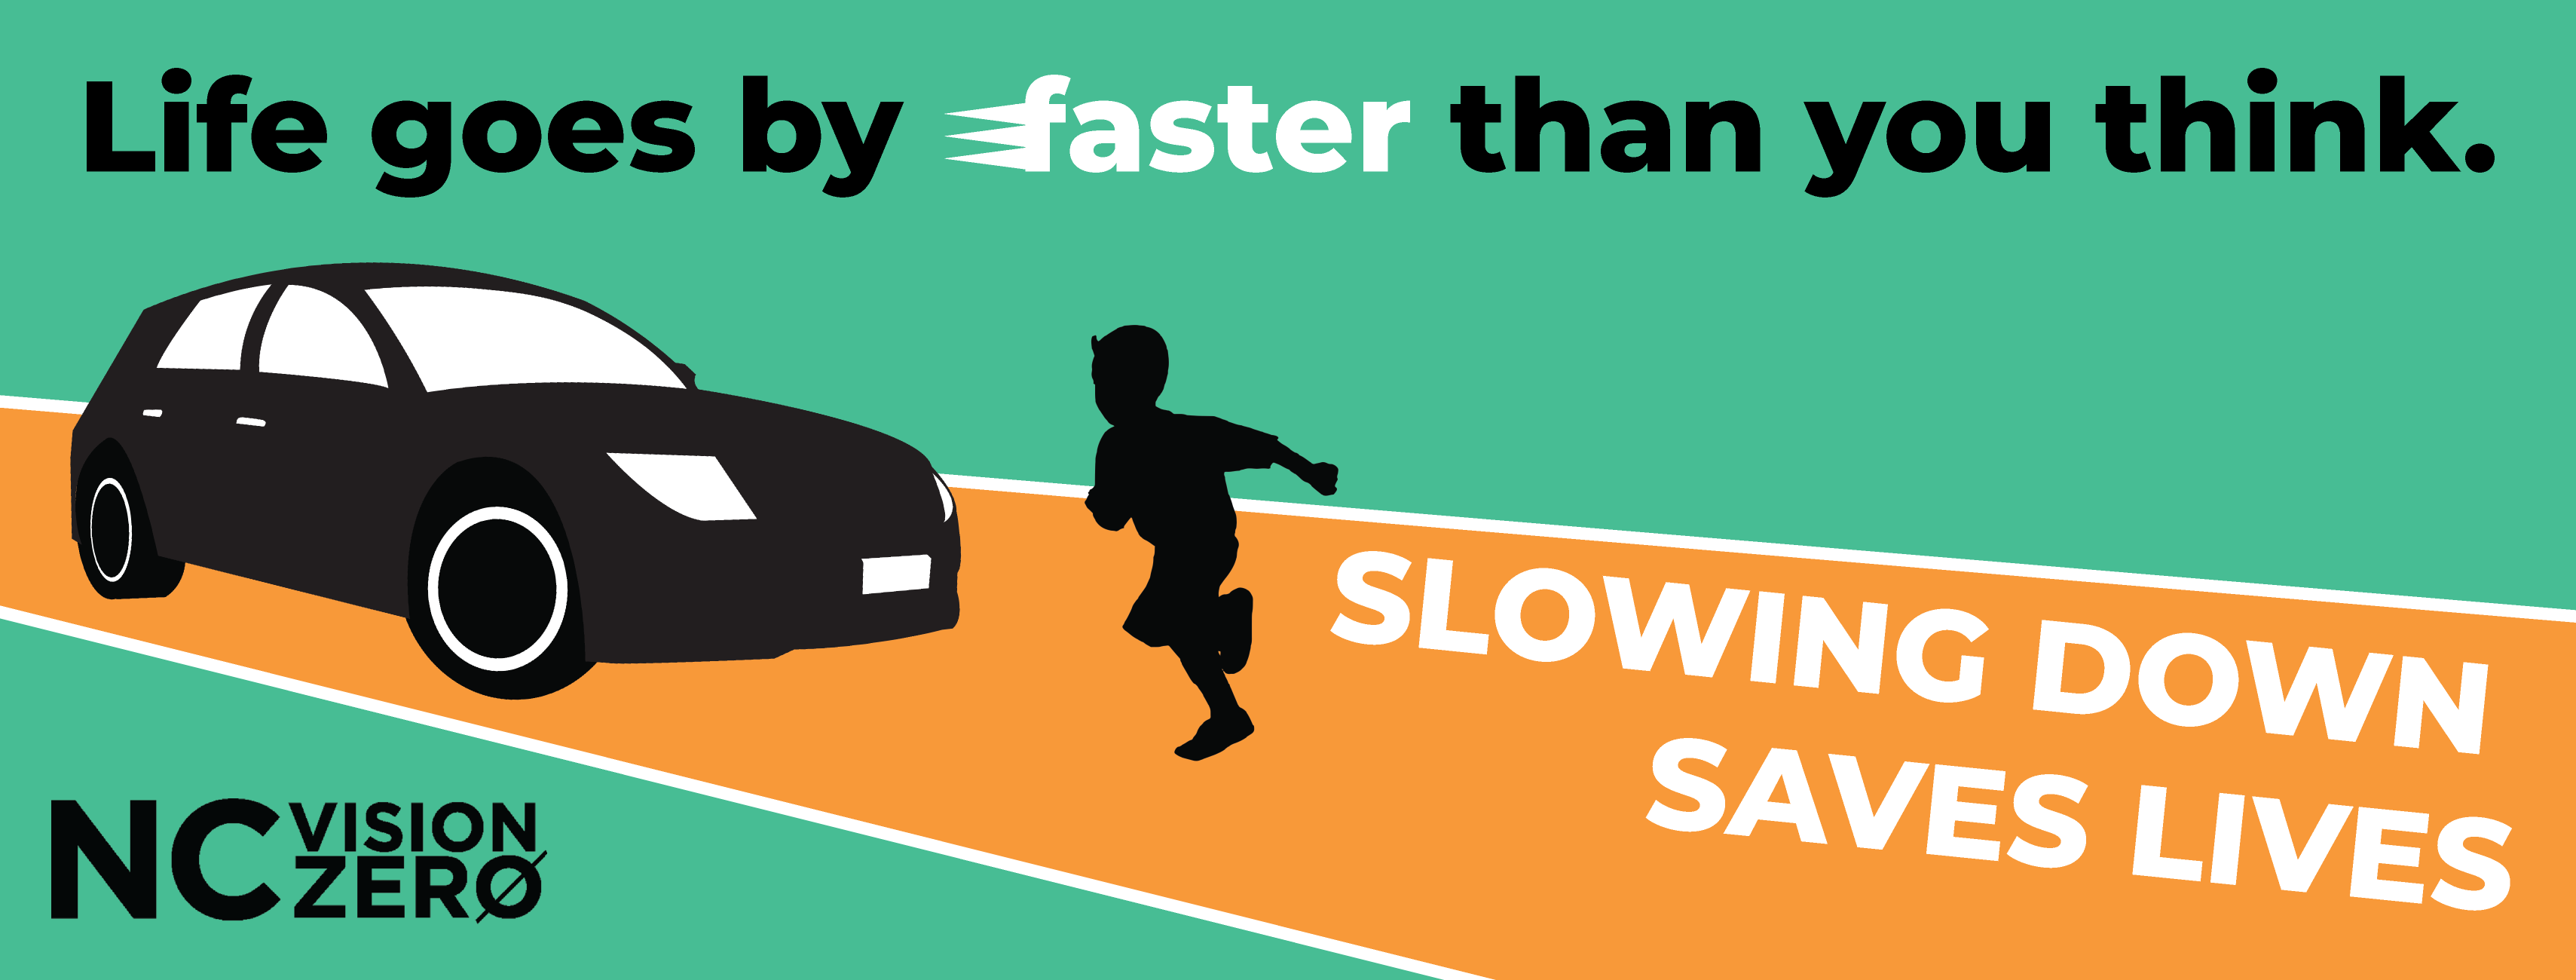 Image shows a child running across the road with a car behind it. Caption reads: Life goes by faster than you think. Slowing down saves lives. 